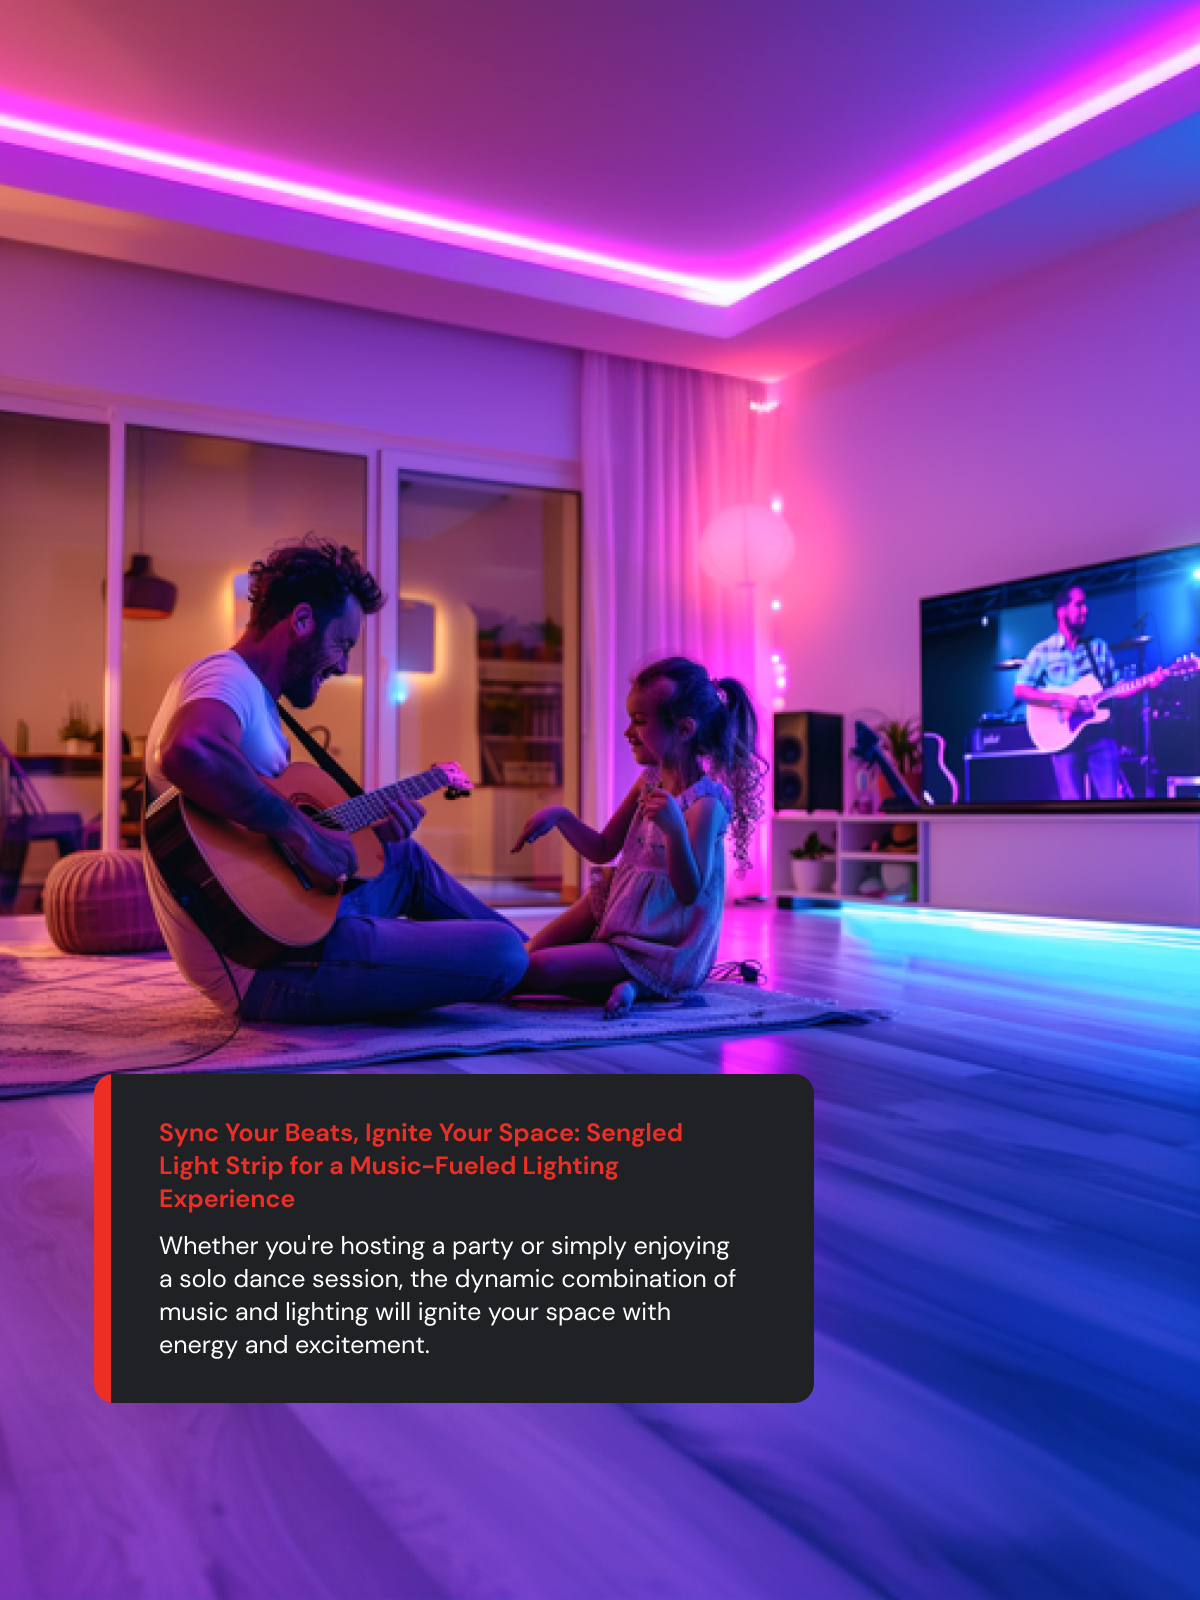 Sync Your Beats, Ignite Your Space: Sengled Light Strip for a Music-Fueled Lighting Experience